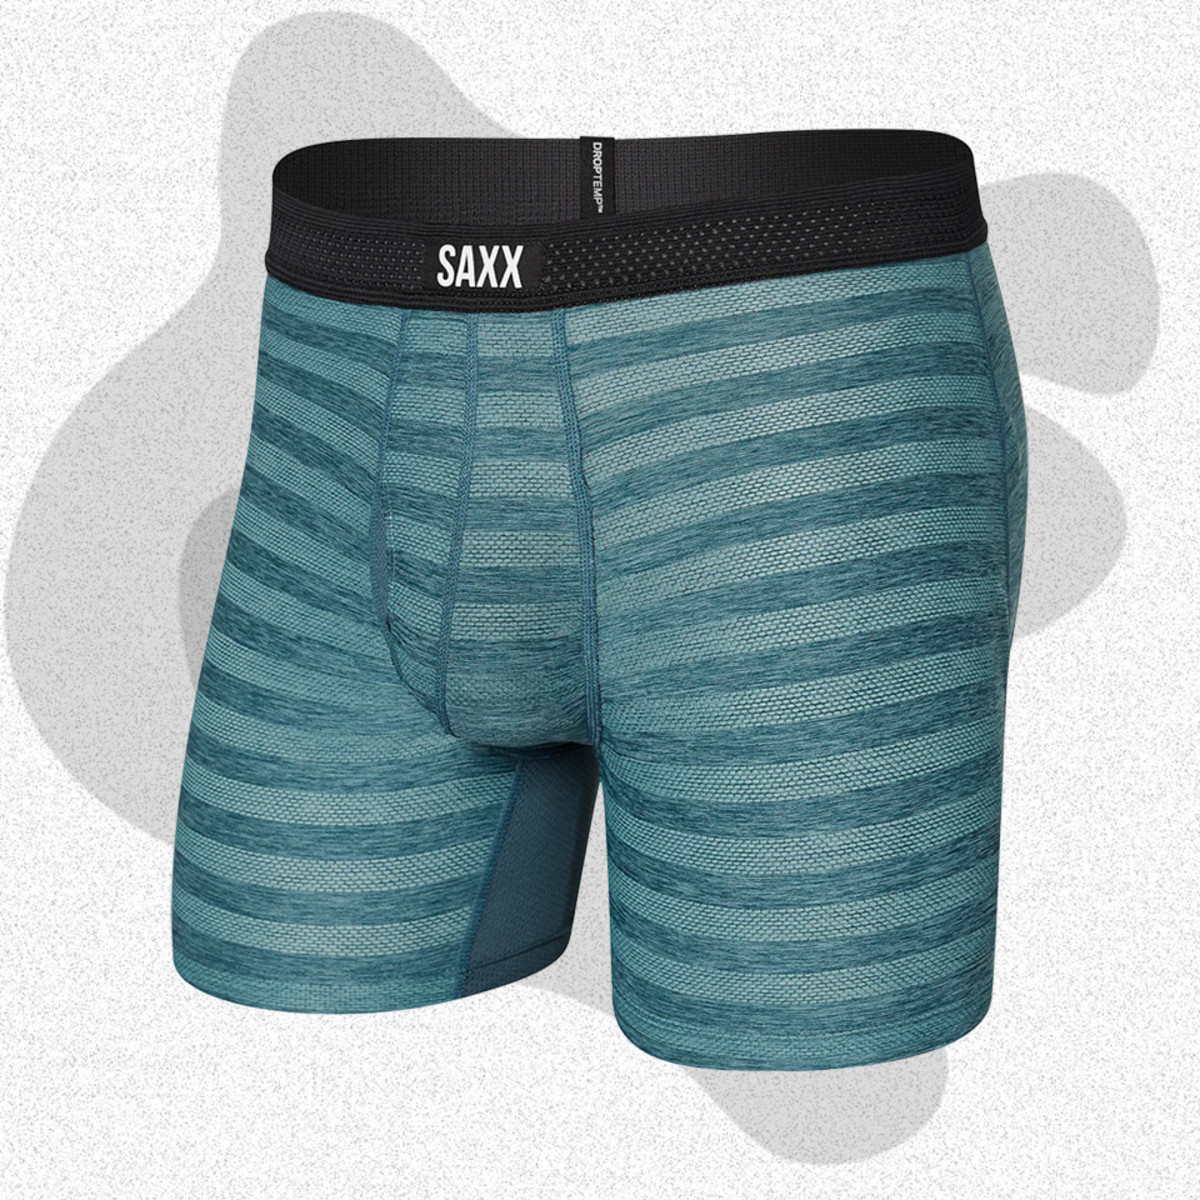 The Best Underwear for Athletic Activities and Daily Use - Cliché